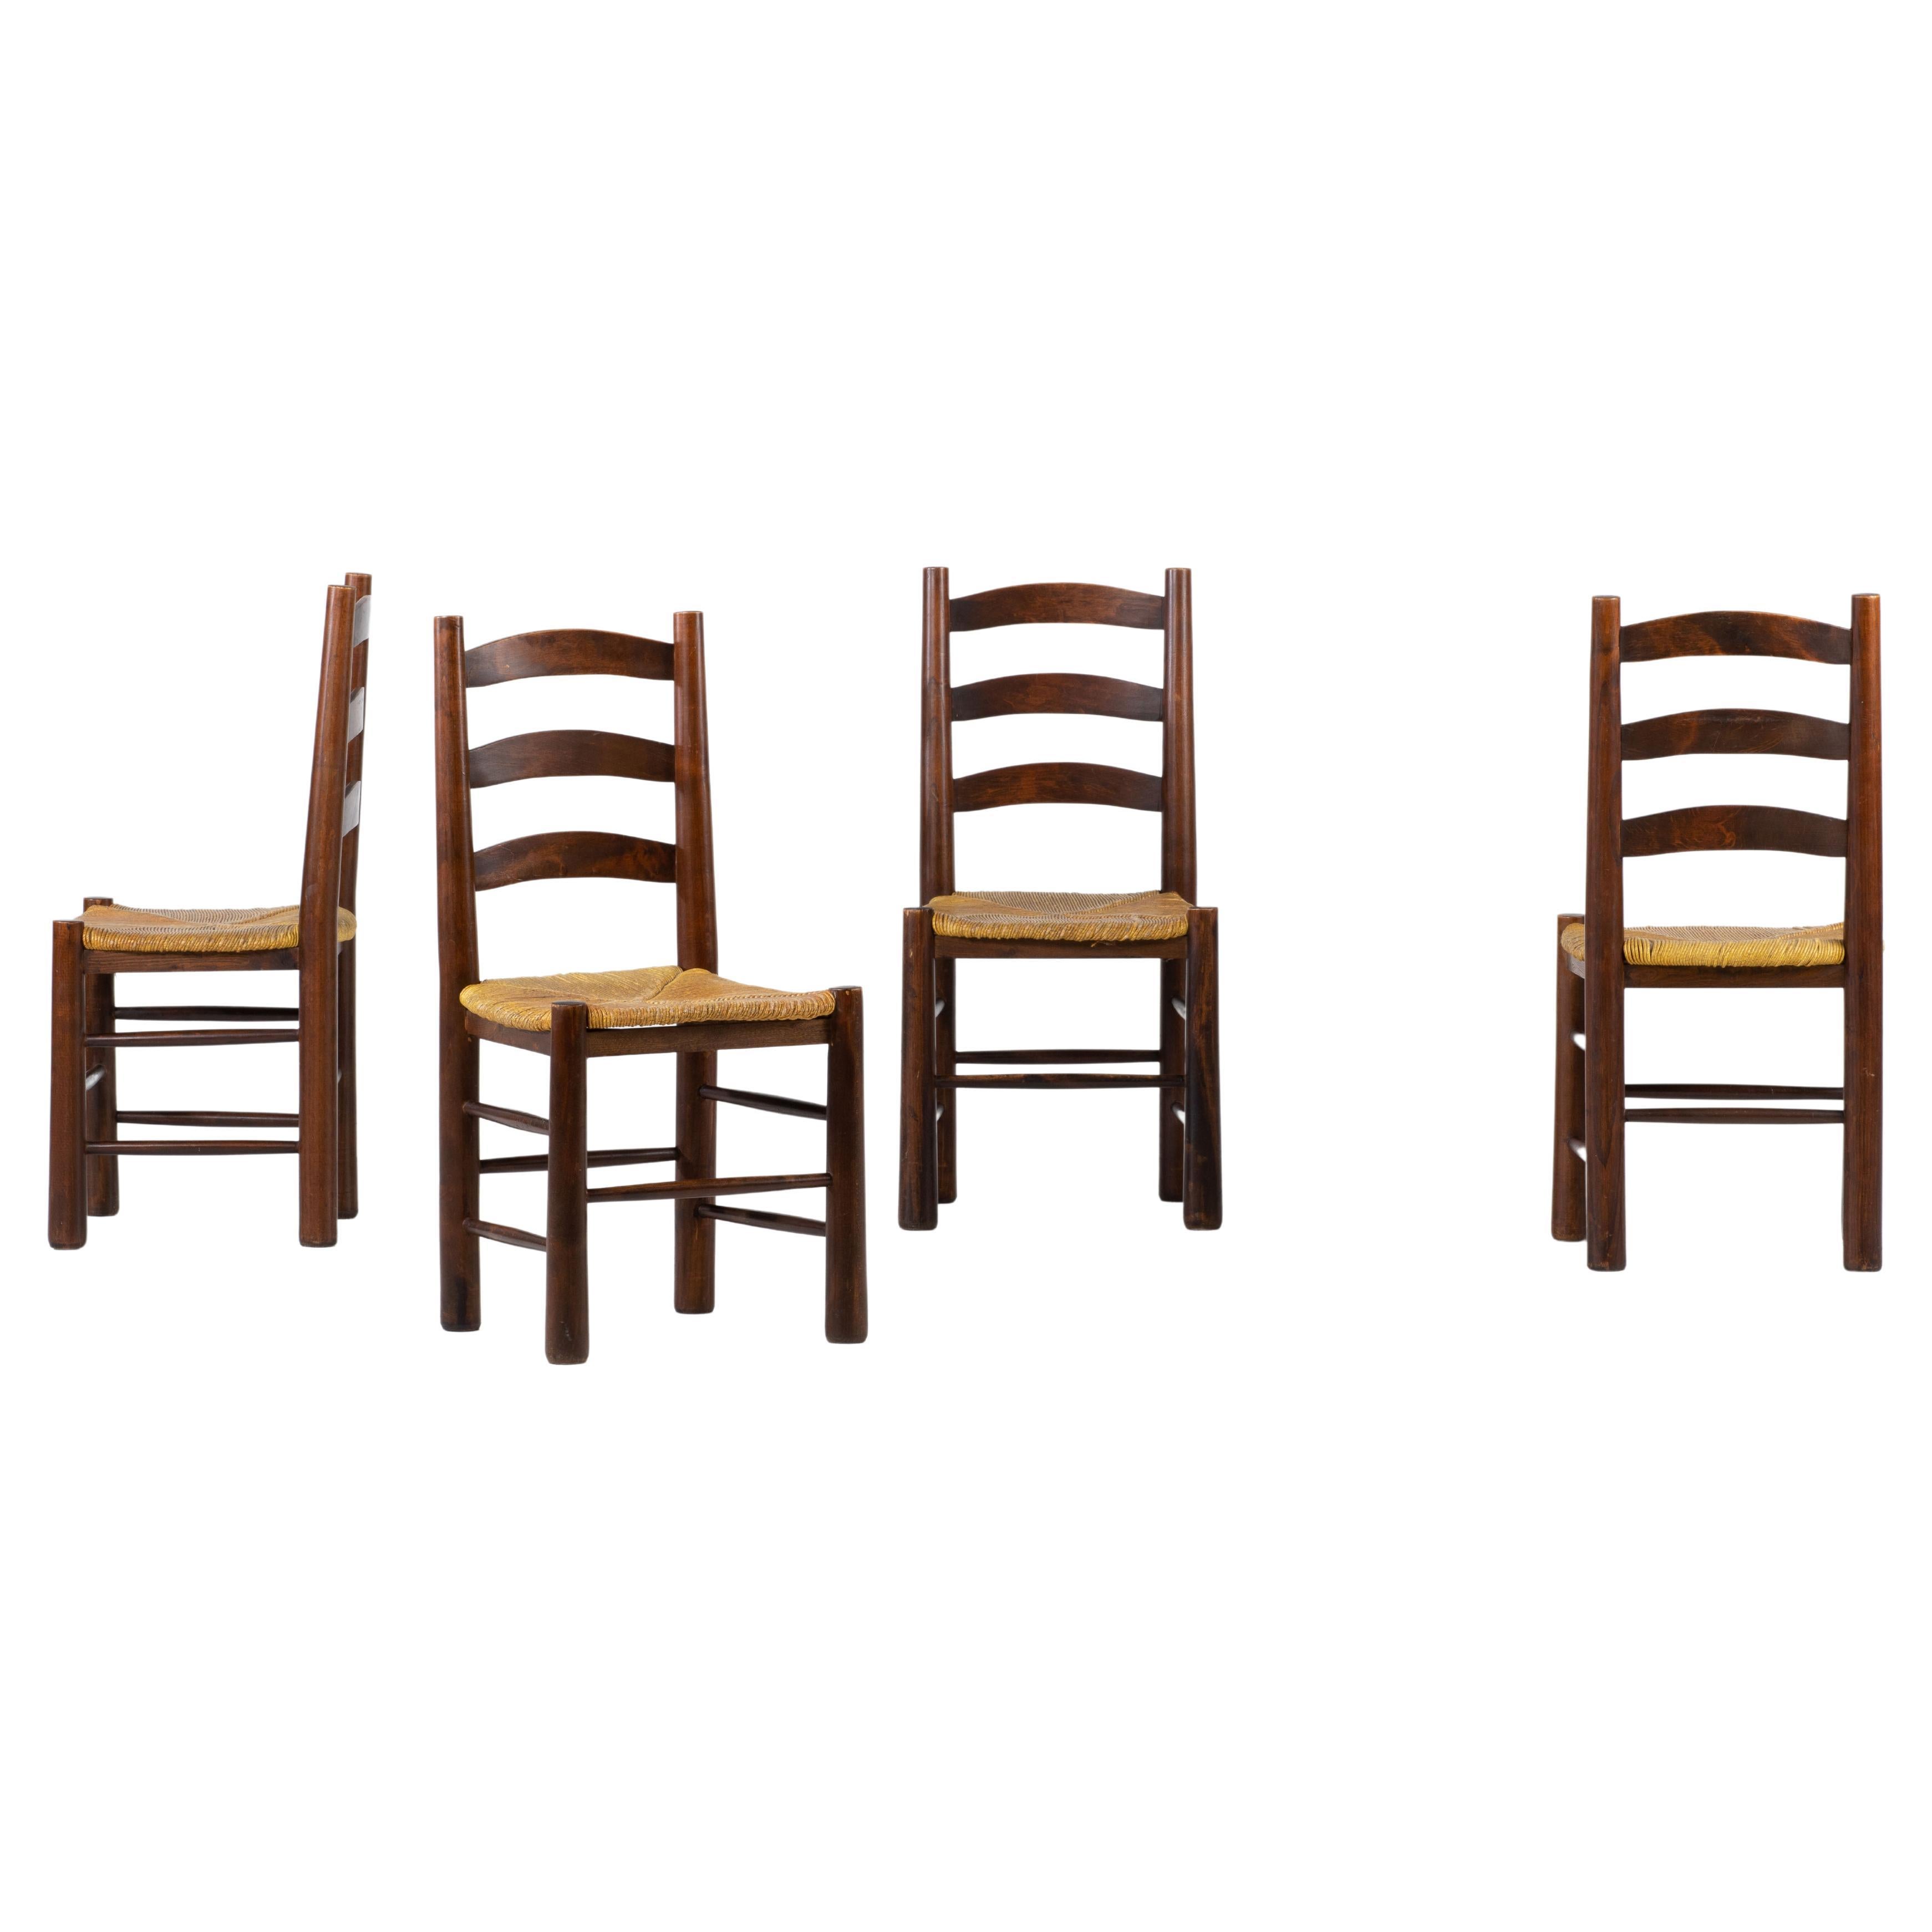 Mid-Century Set of 6 Chairs in style of Perriand, France, 1940